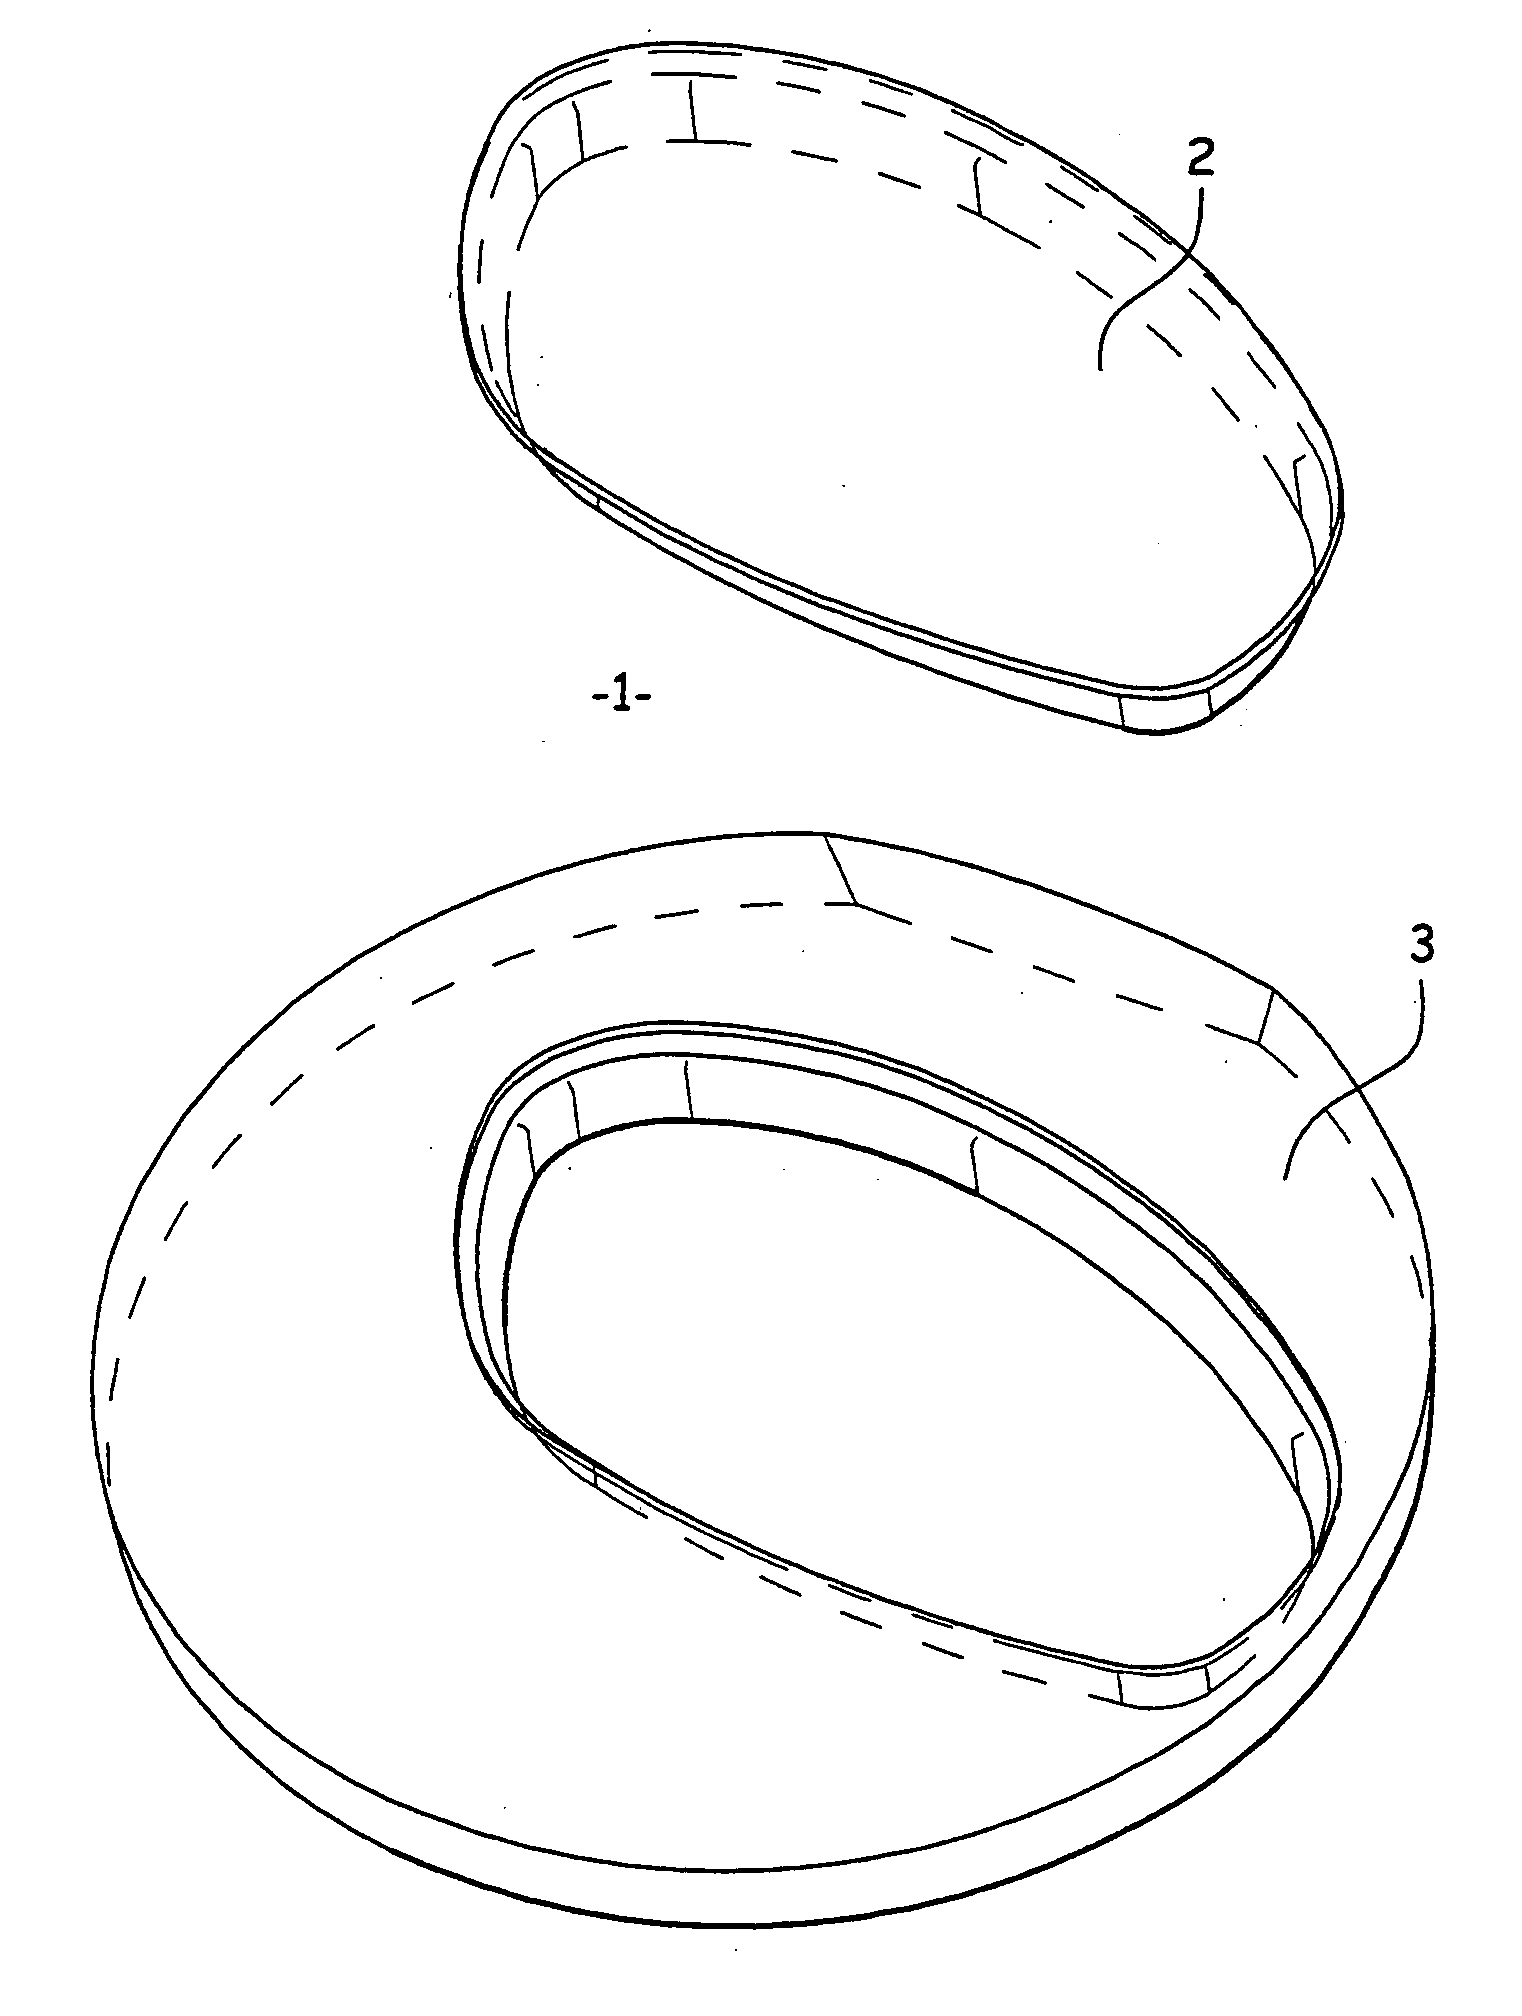 Method of producing a corrective spectacle lens and lens blank used for same